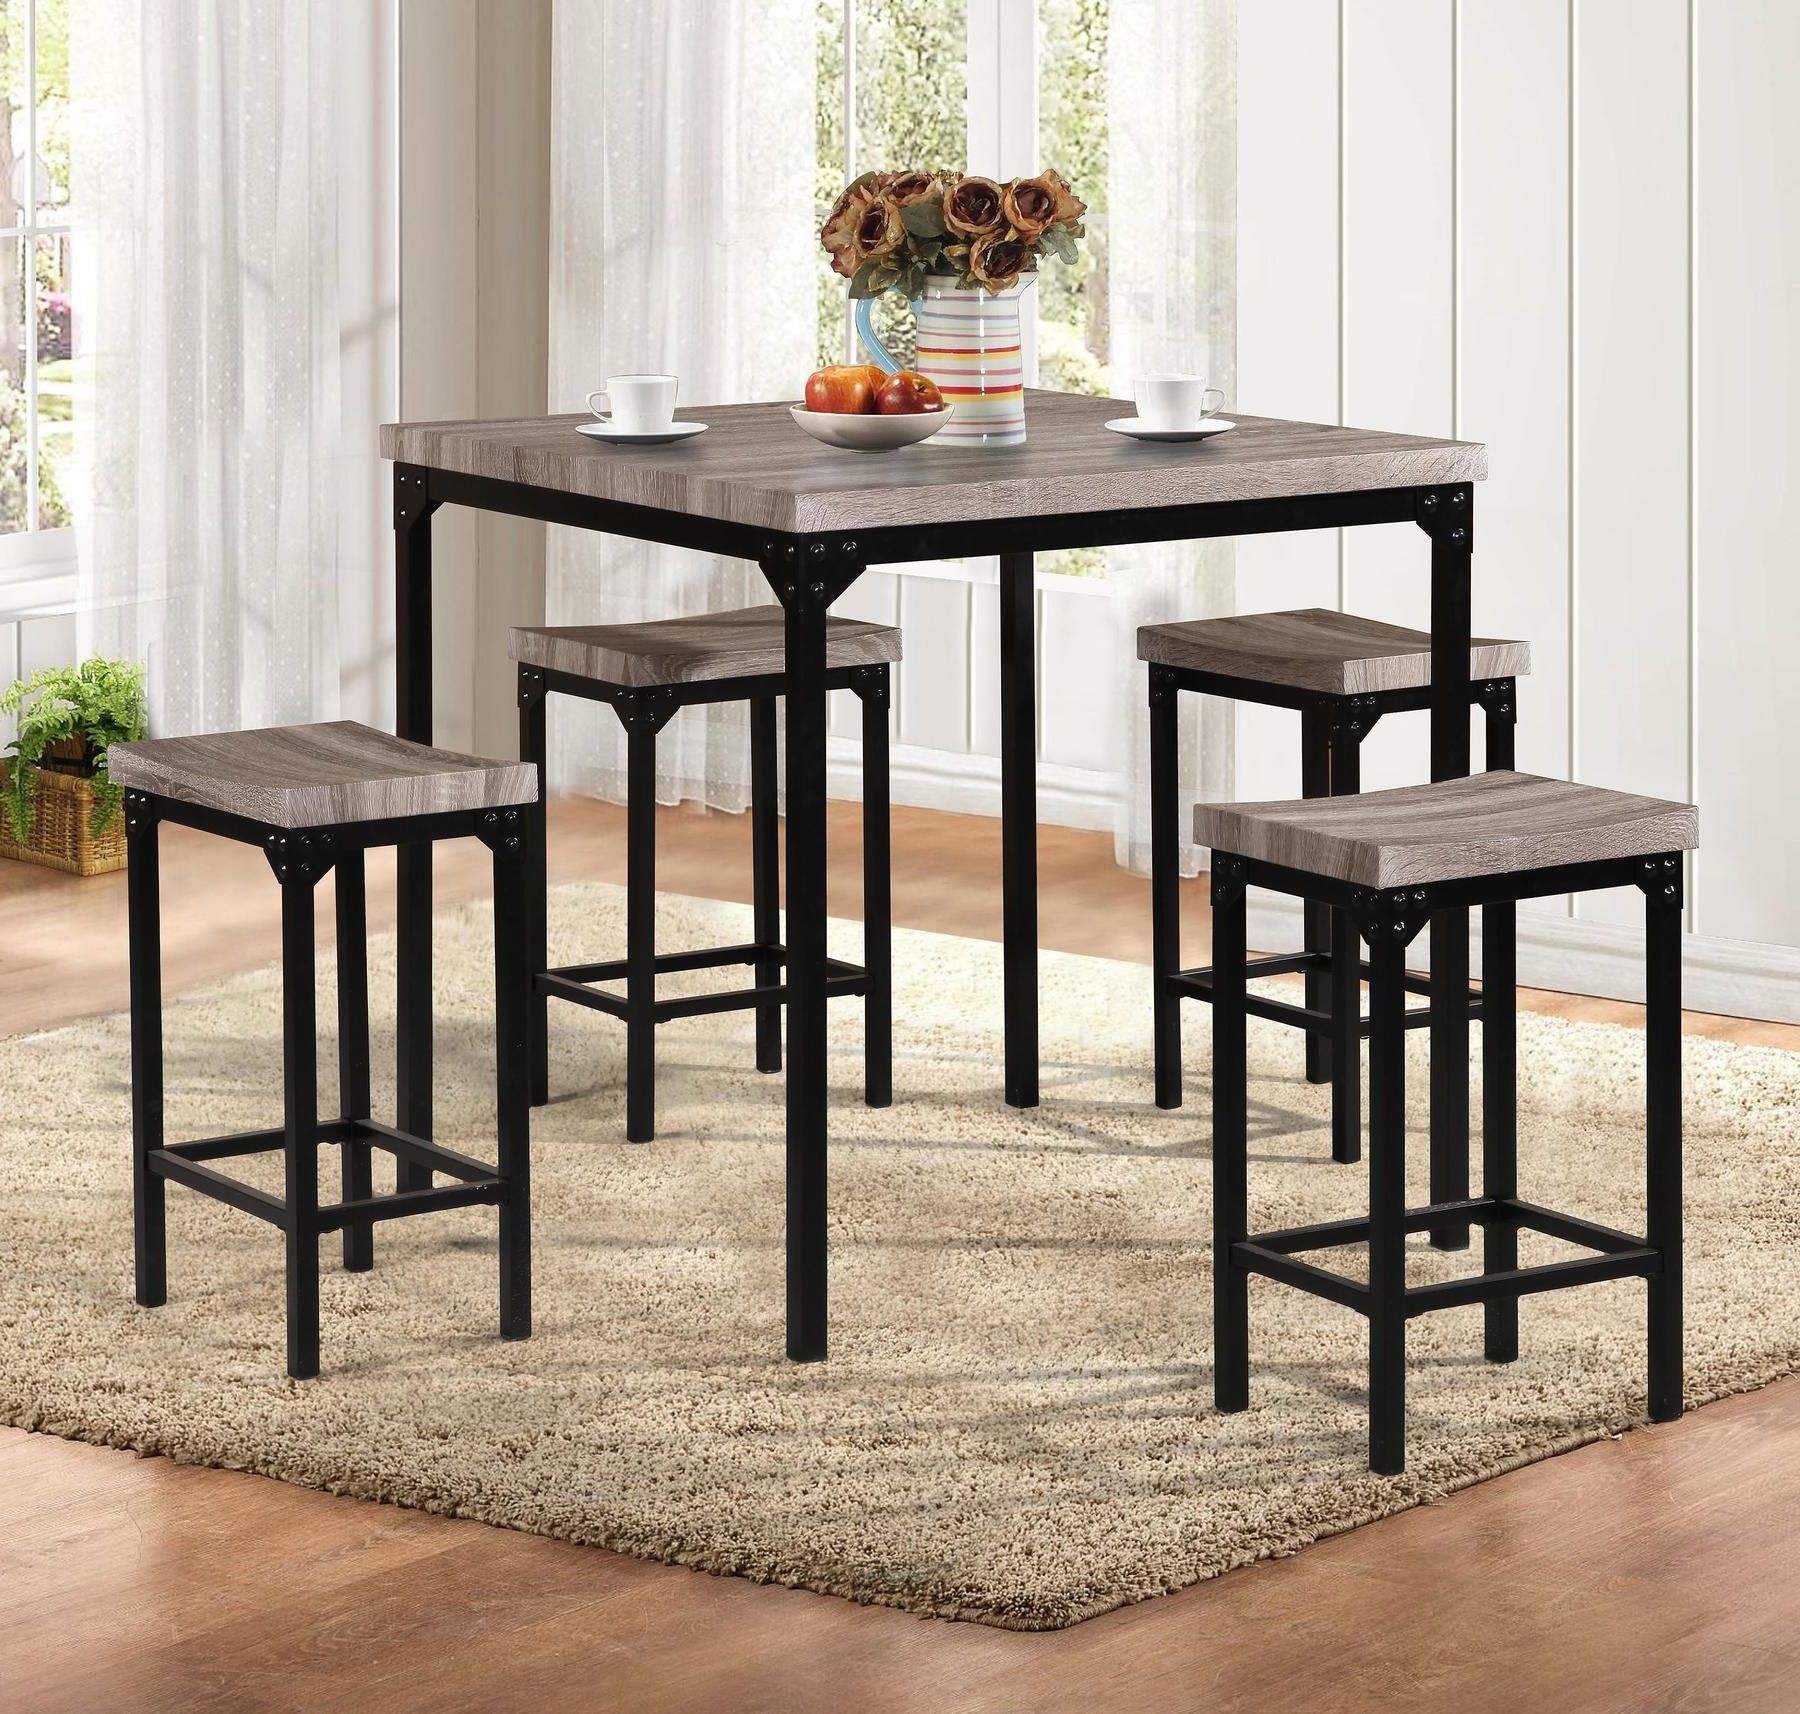 Popular Poundex P2141 Casual Counter Height 5pcs Dining Set Throughout Liesel Bar Height Pedestal Dining Tables (View 13 of 20)